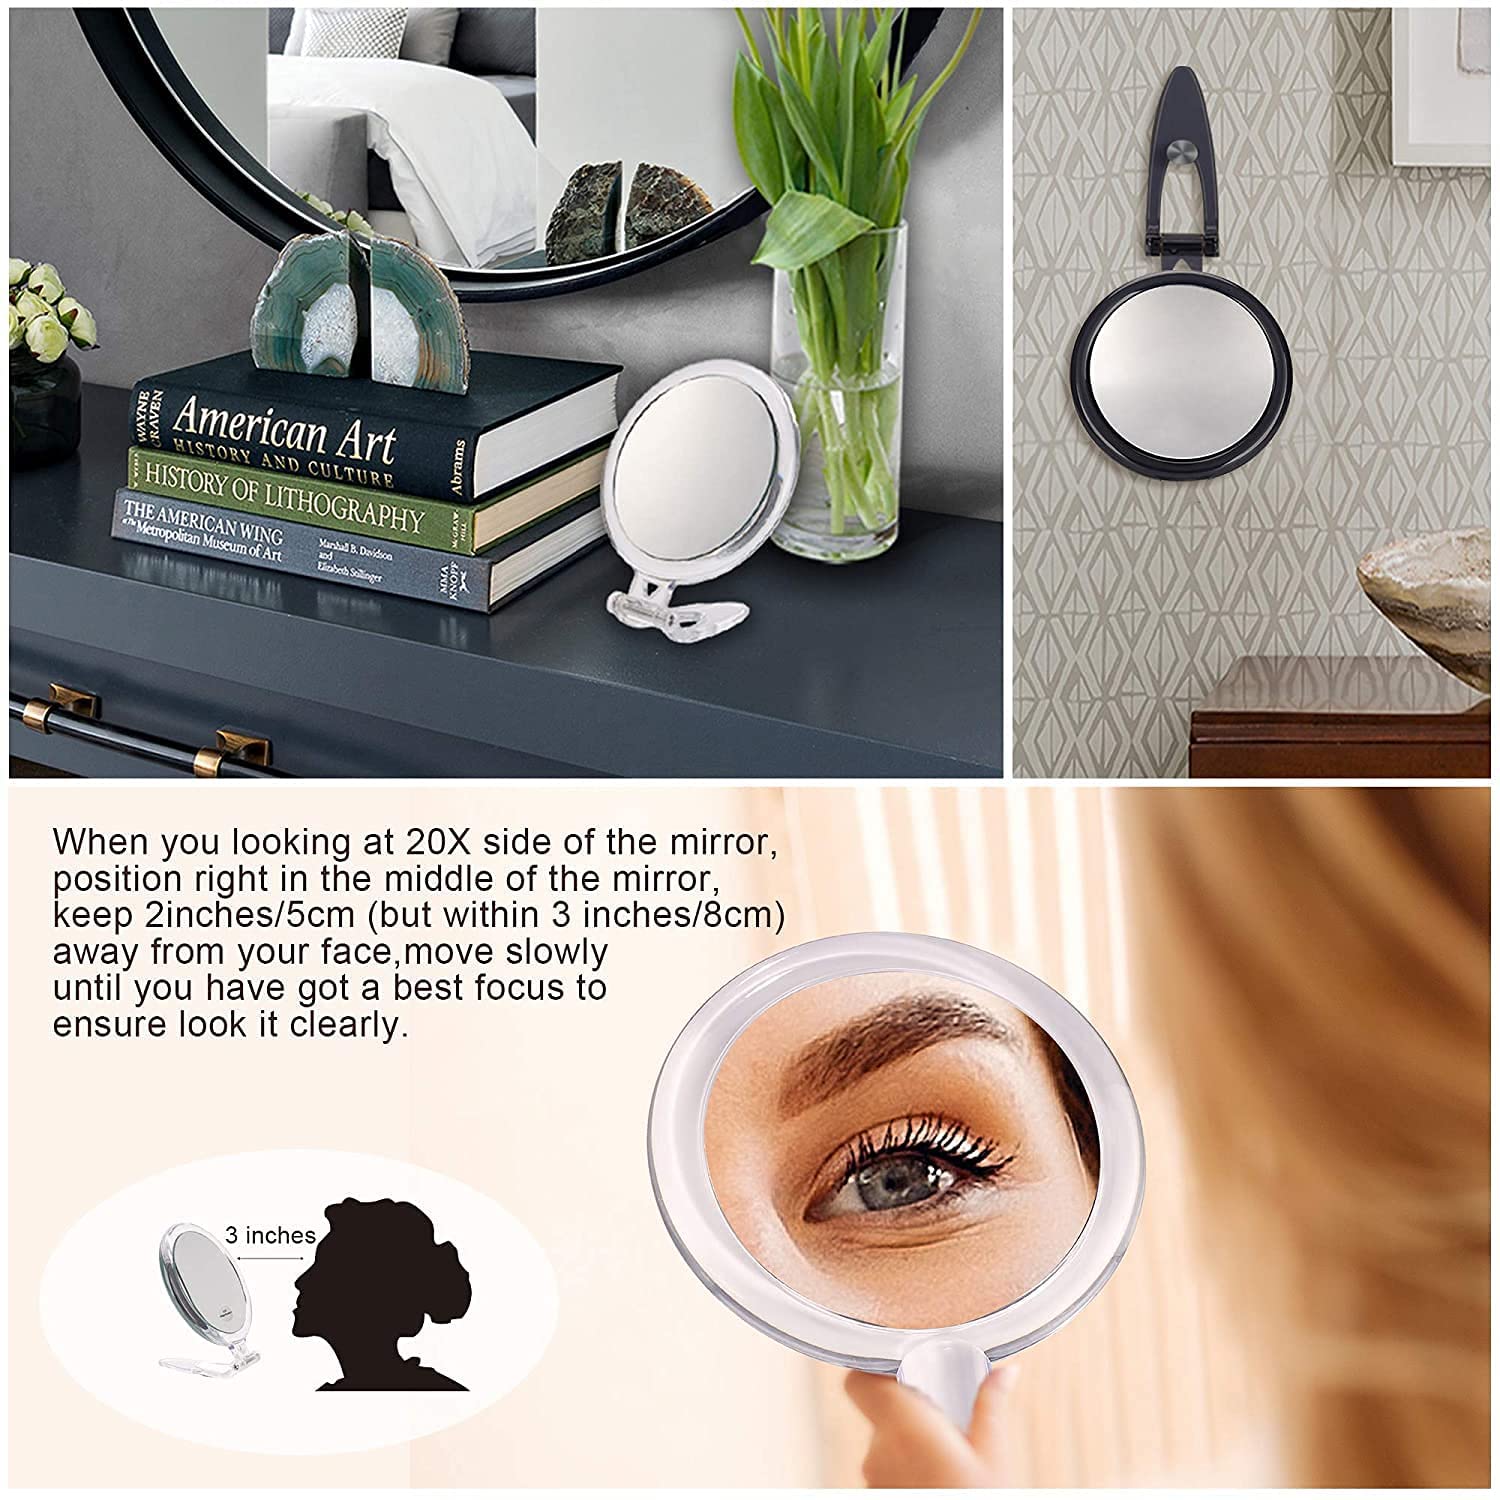 20X Magnifying Hand Mirror For Makeup, Tweezing, And Blemish Removal (12.5 Cm Black)